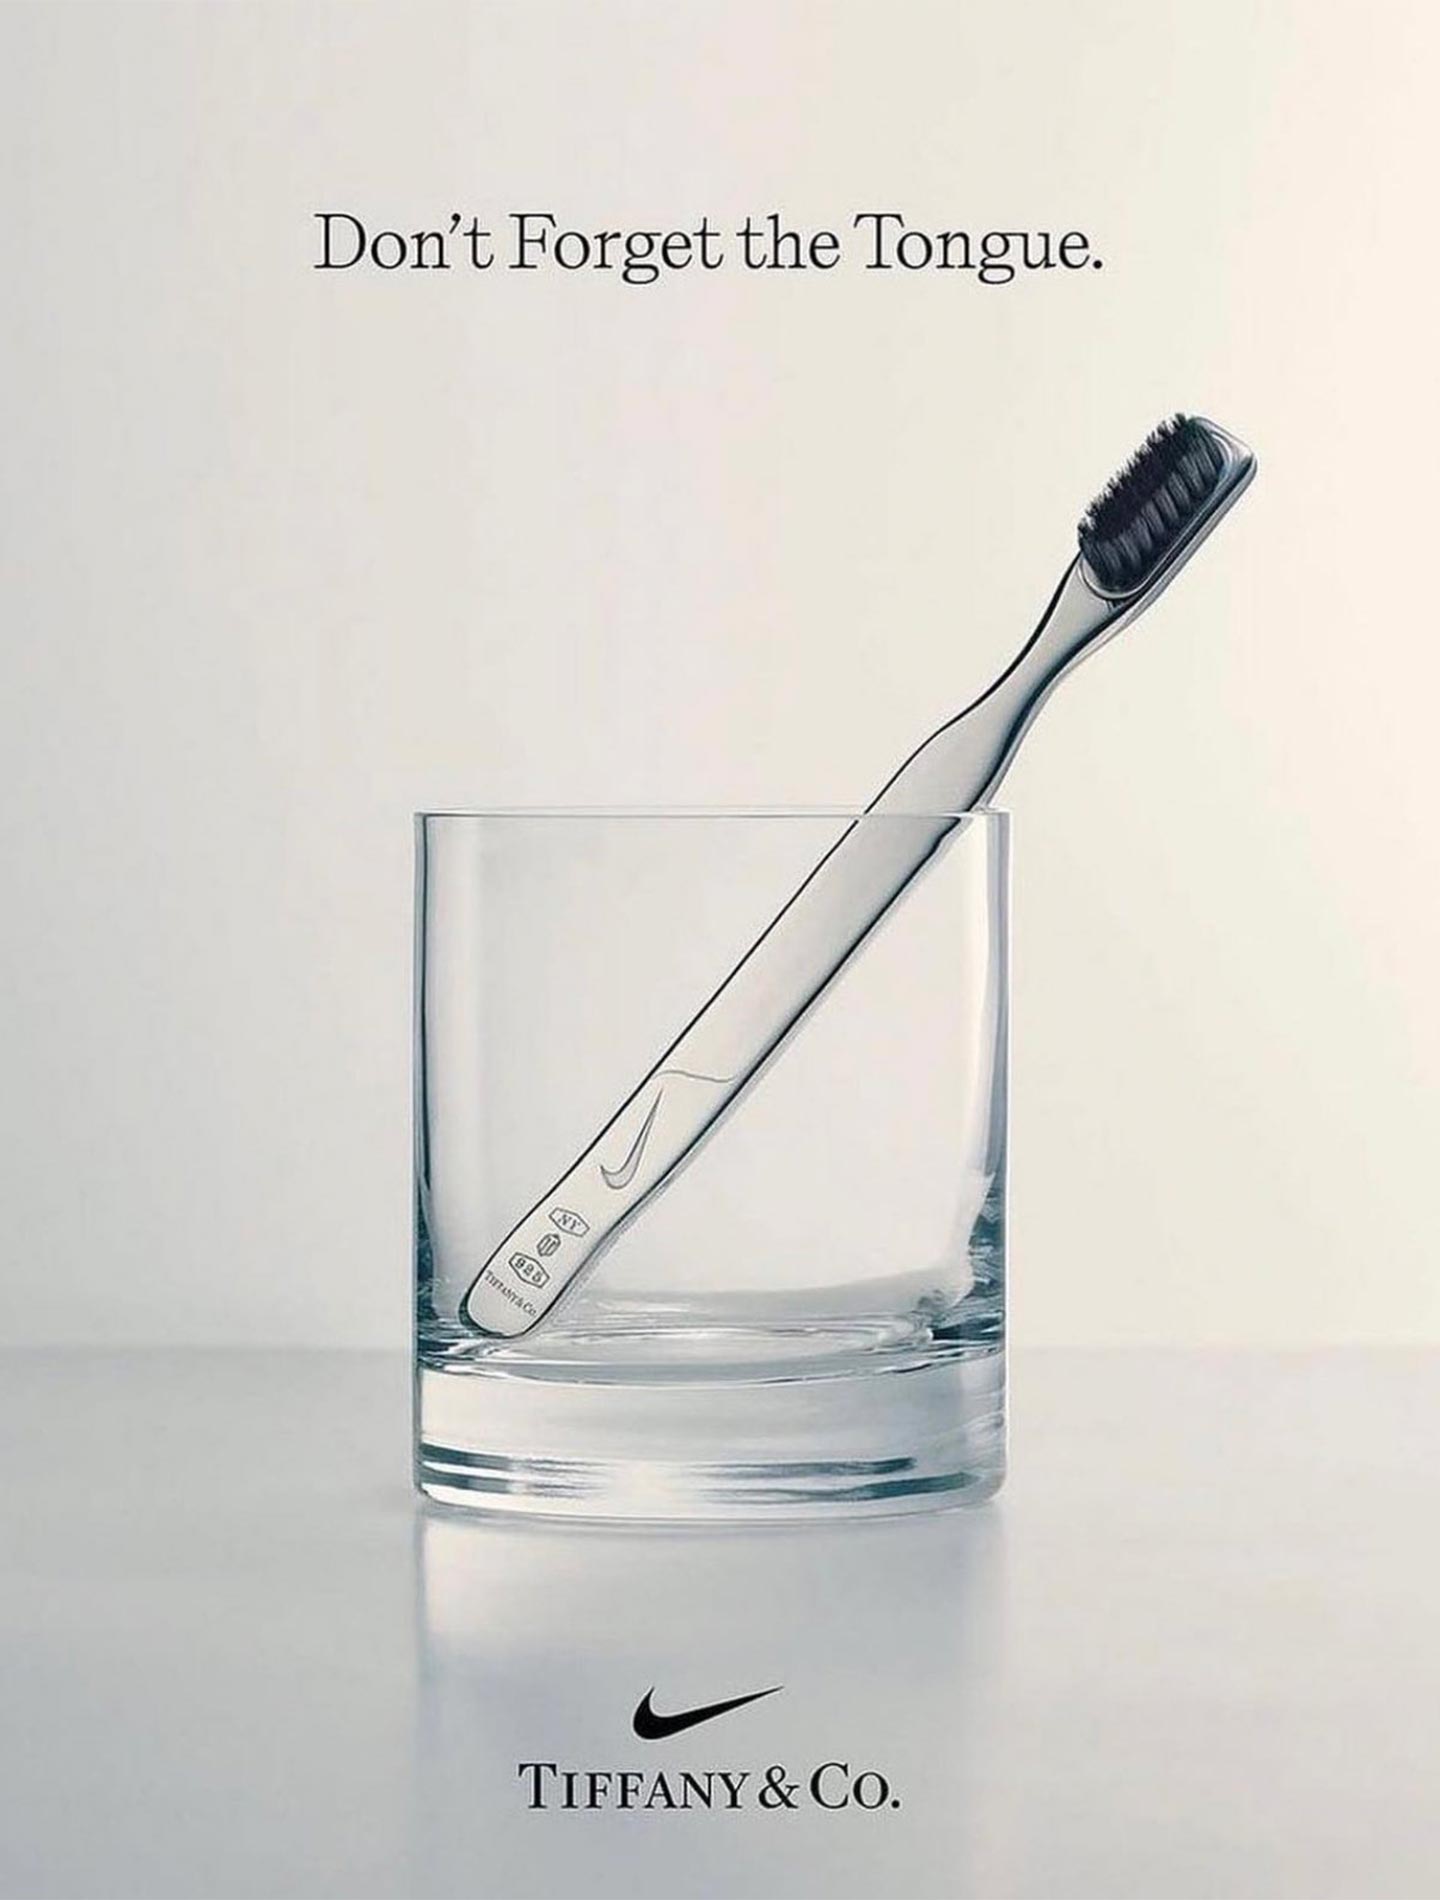 The Nike/Tiffany shoe brush was presented in a post on the Tiffany & Co. Instagram profile and accompanied by the wording: “Don’t forget the Tongue”